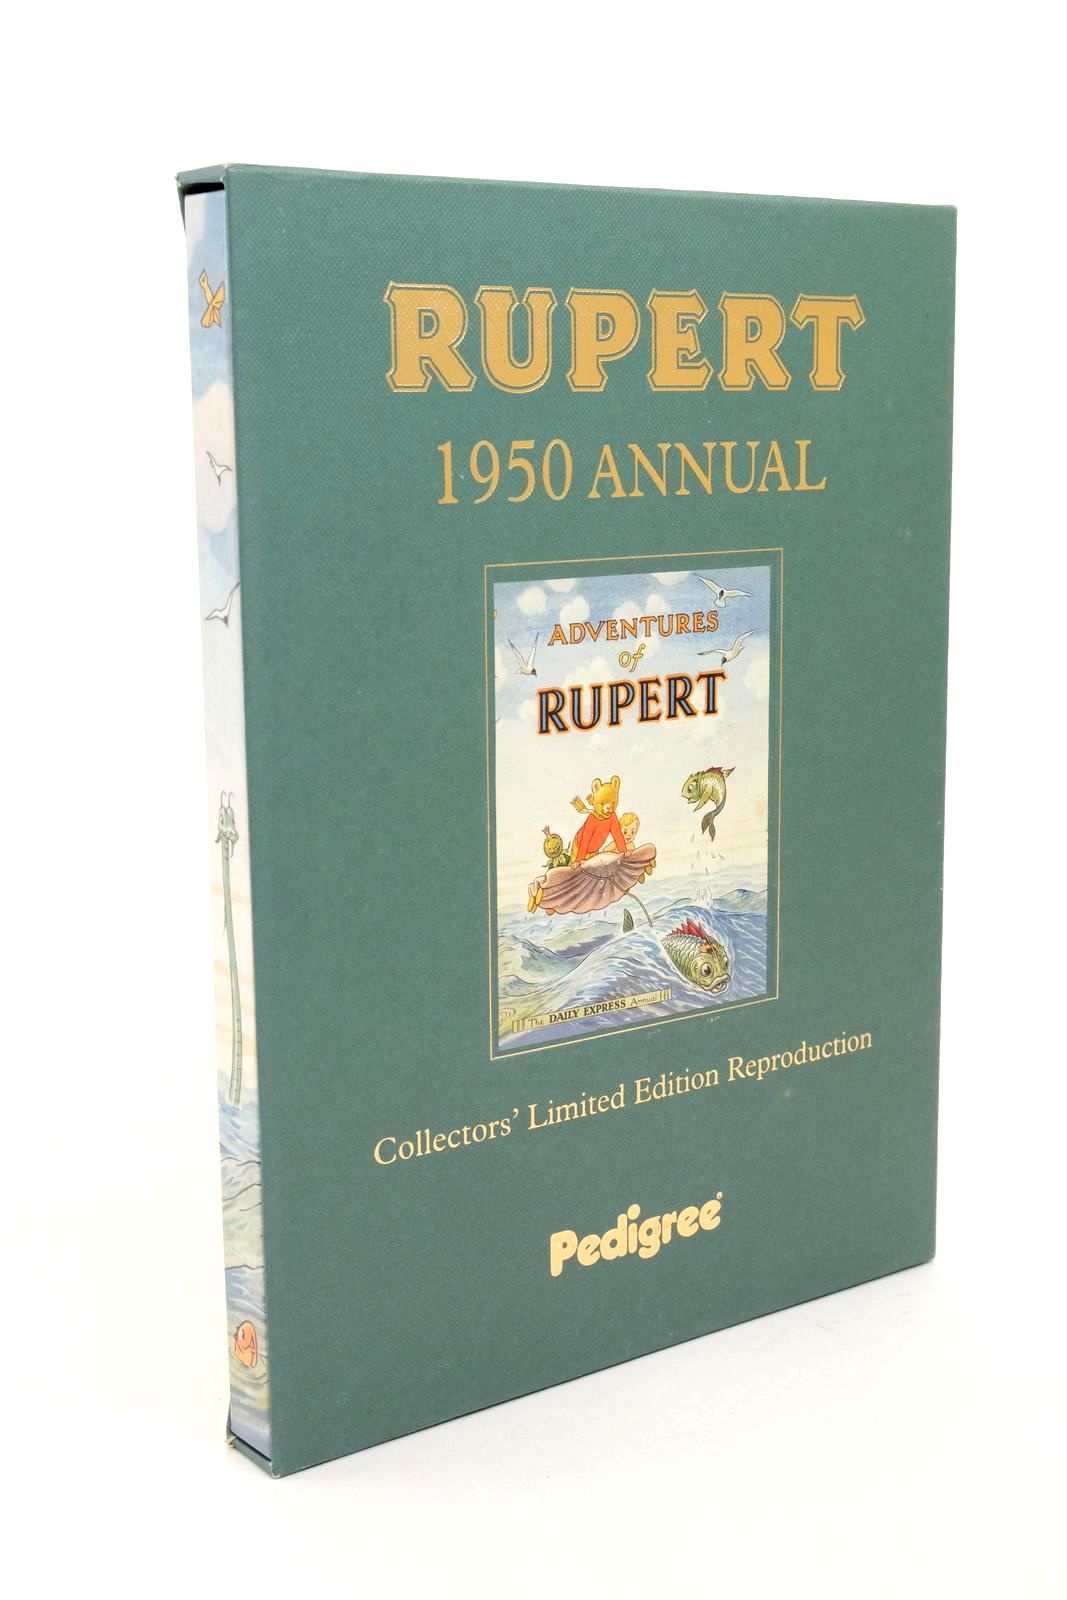 Photo of RUPERT ANNUAL 1950 (FACSIMILE) - ADVENTURES OF RUPERT written by Bestall, Alfred illustrated by Bestall, Alfred published by Pedigree Books Limited (STOCK CODE: 1322864)  for sale by Stella & Rose's Books